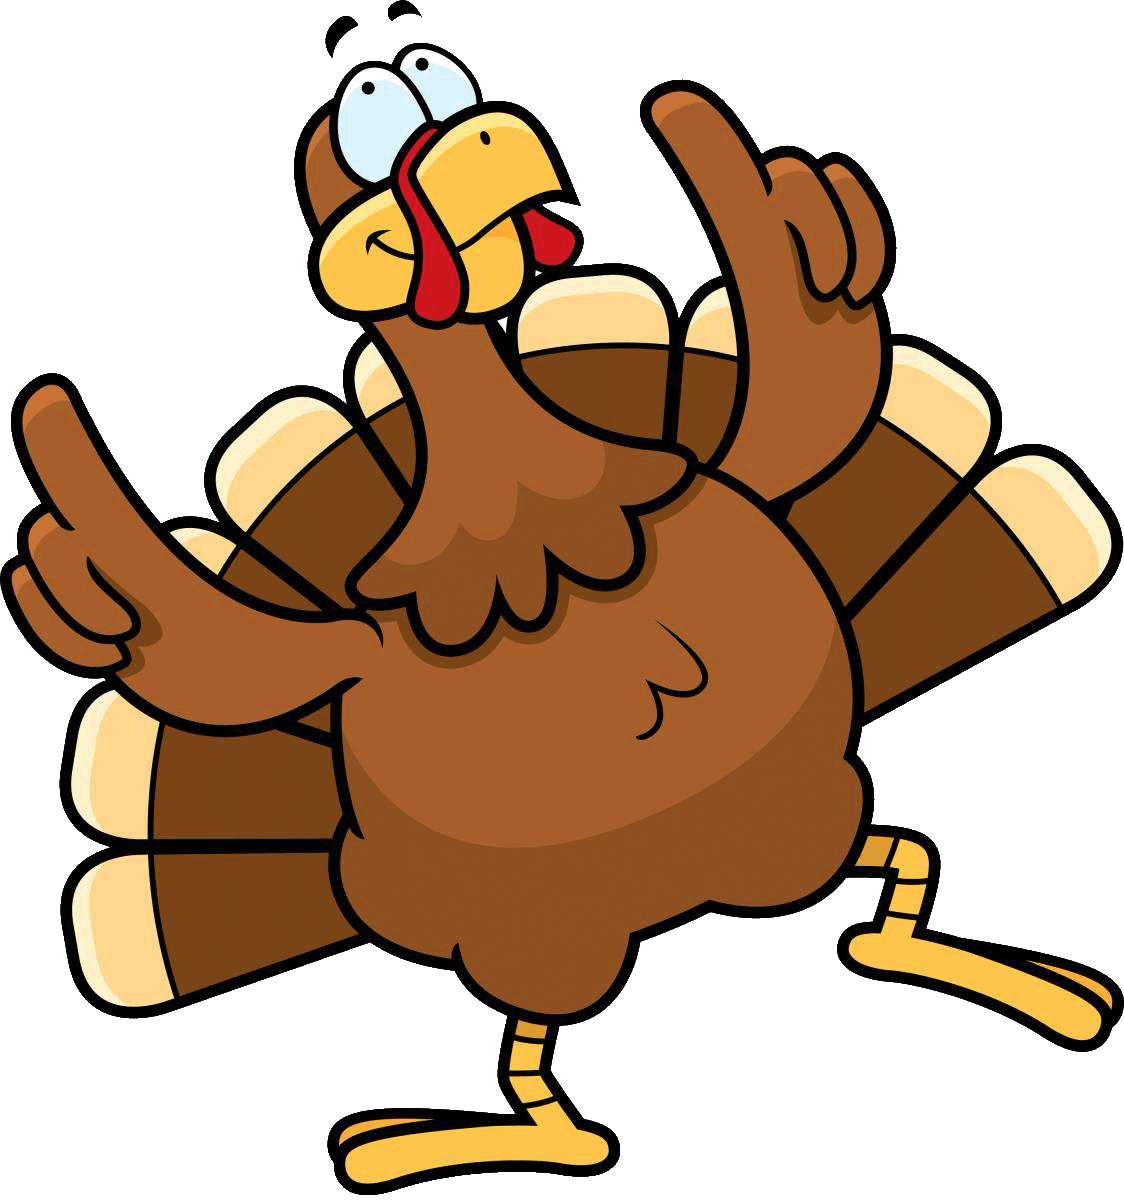 Pictures Of Animated Turkeys - ClipArt Best